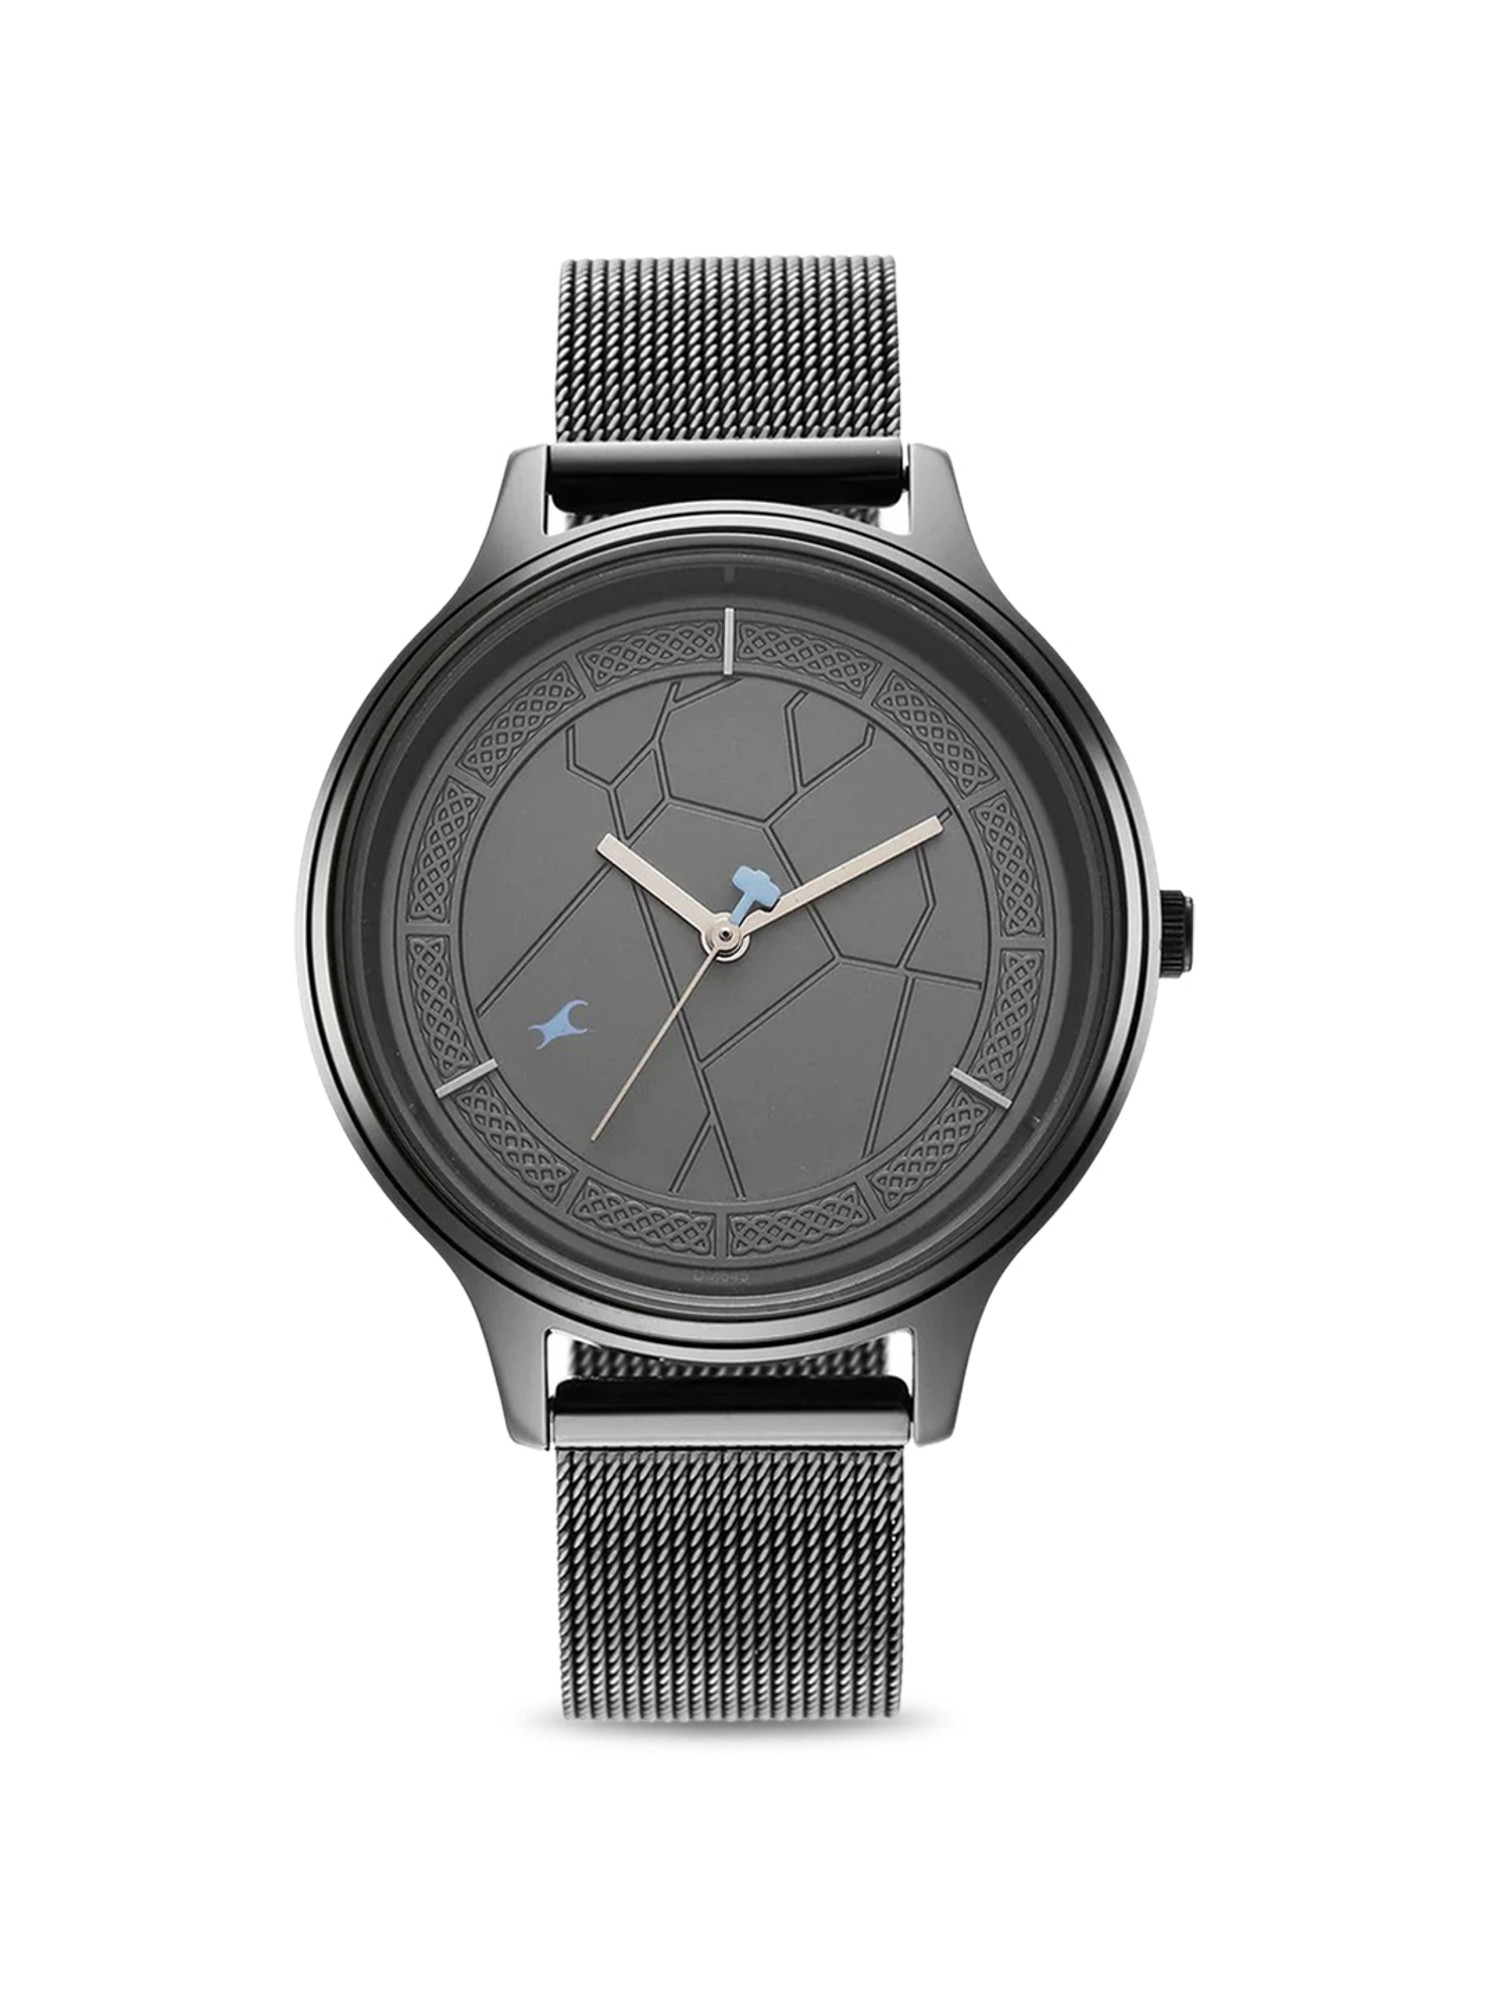 Shop Online Fastrack Grey Dial Analog Unisex Watch 38024Pp47 | Titan |  fastrack